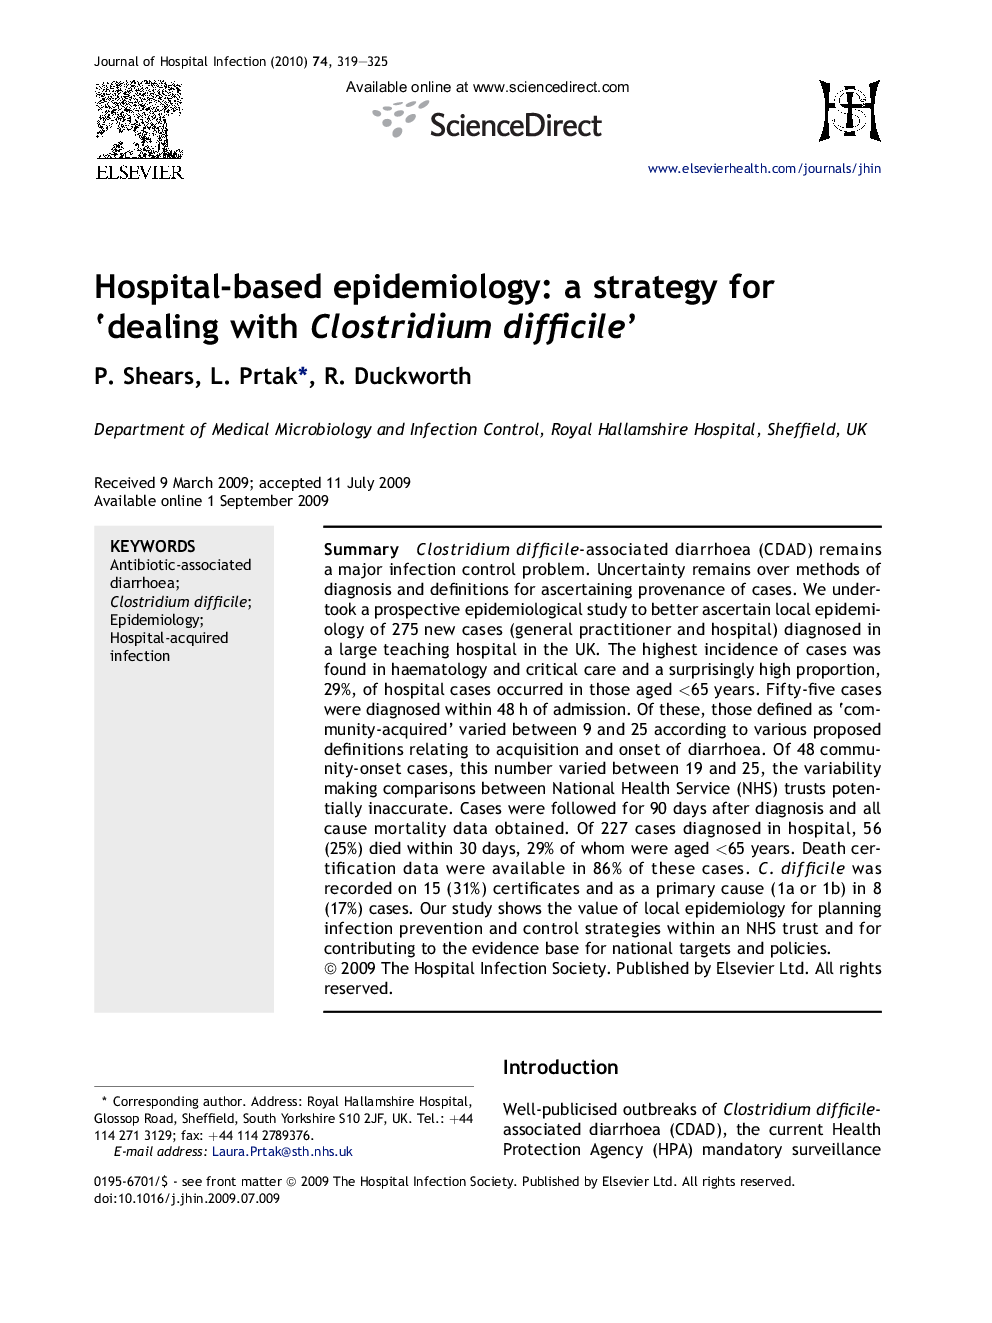 Hospital-based epidemiology: a strategy for ‘dealing with Clostridium difficile’